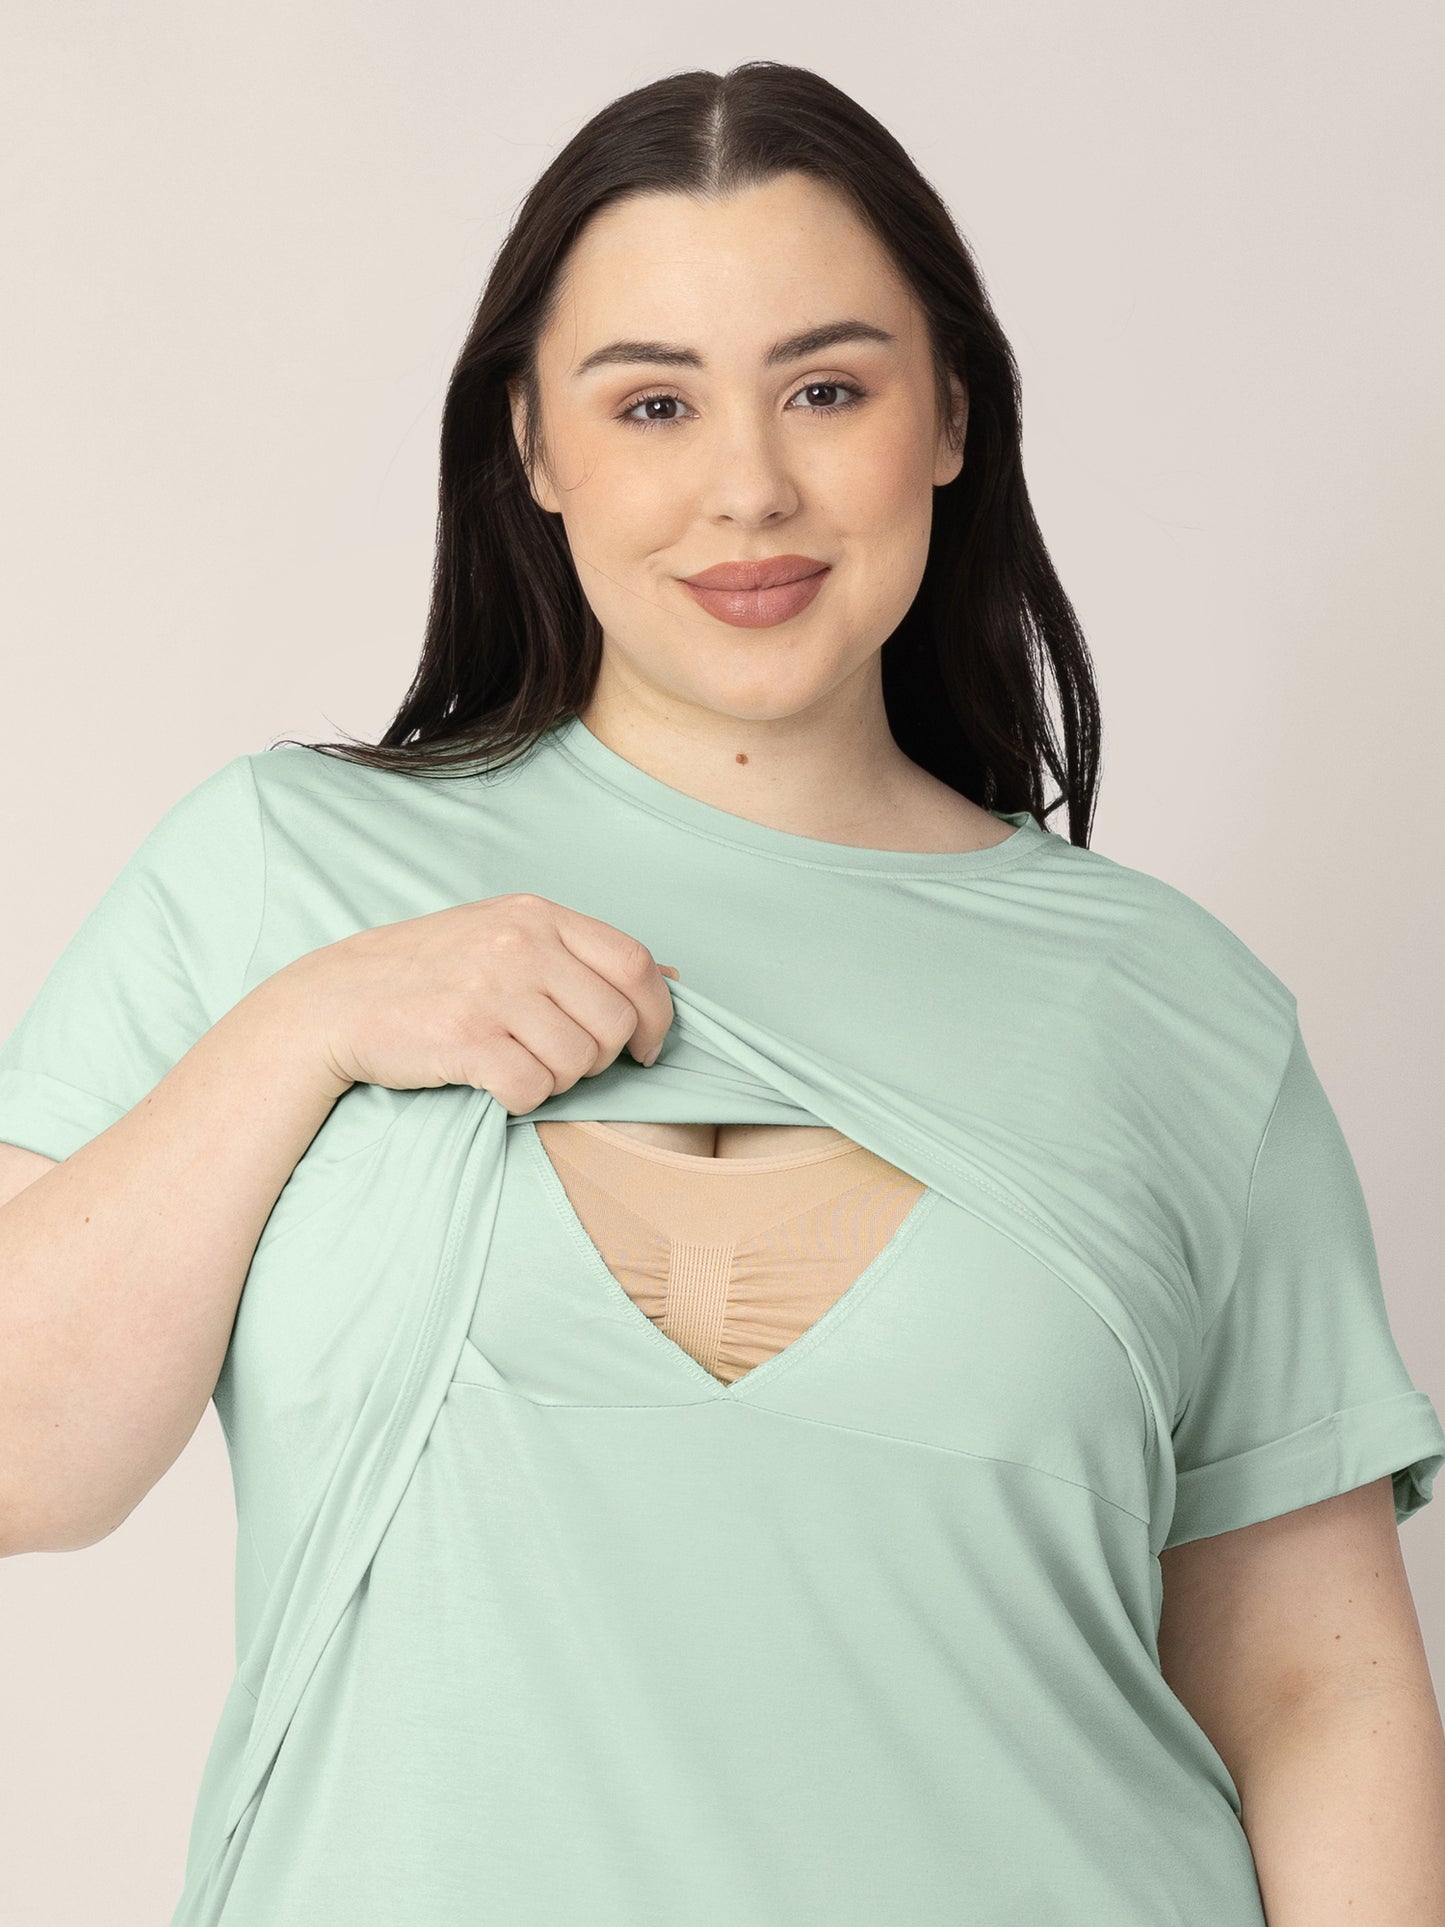 Model wearing the Everyday Asymmetrical Nursing T-shirt in Soft Mint and showing the pull aside nursing panel for easy breastfeeding access.